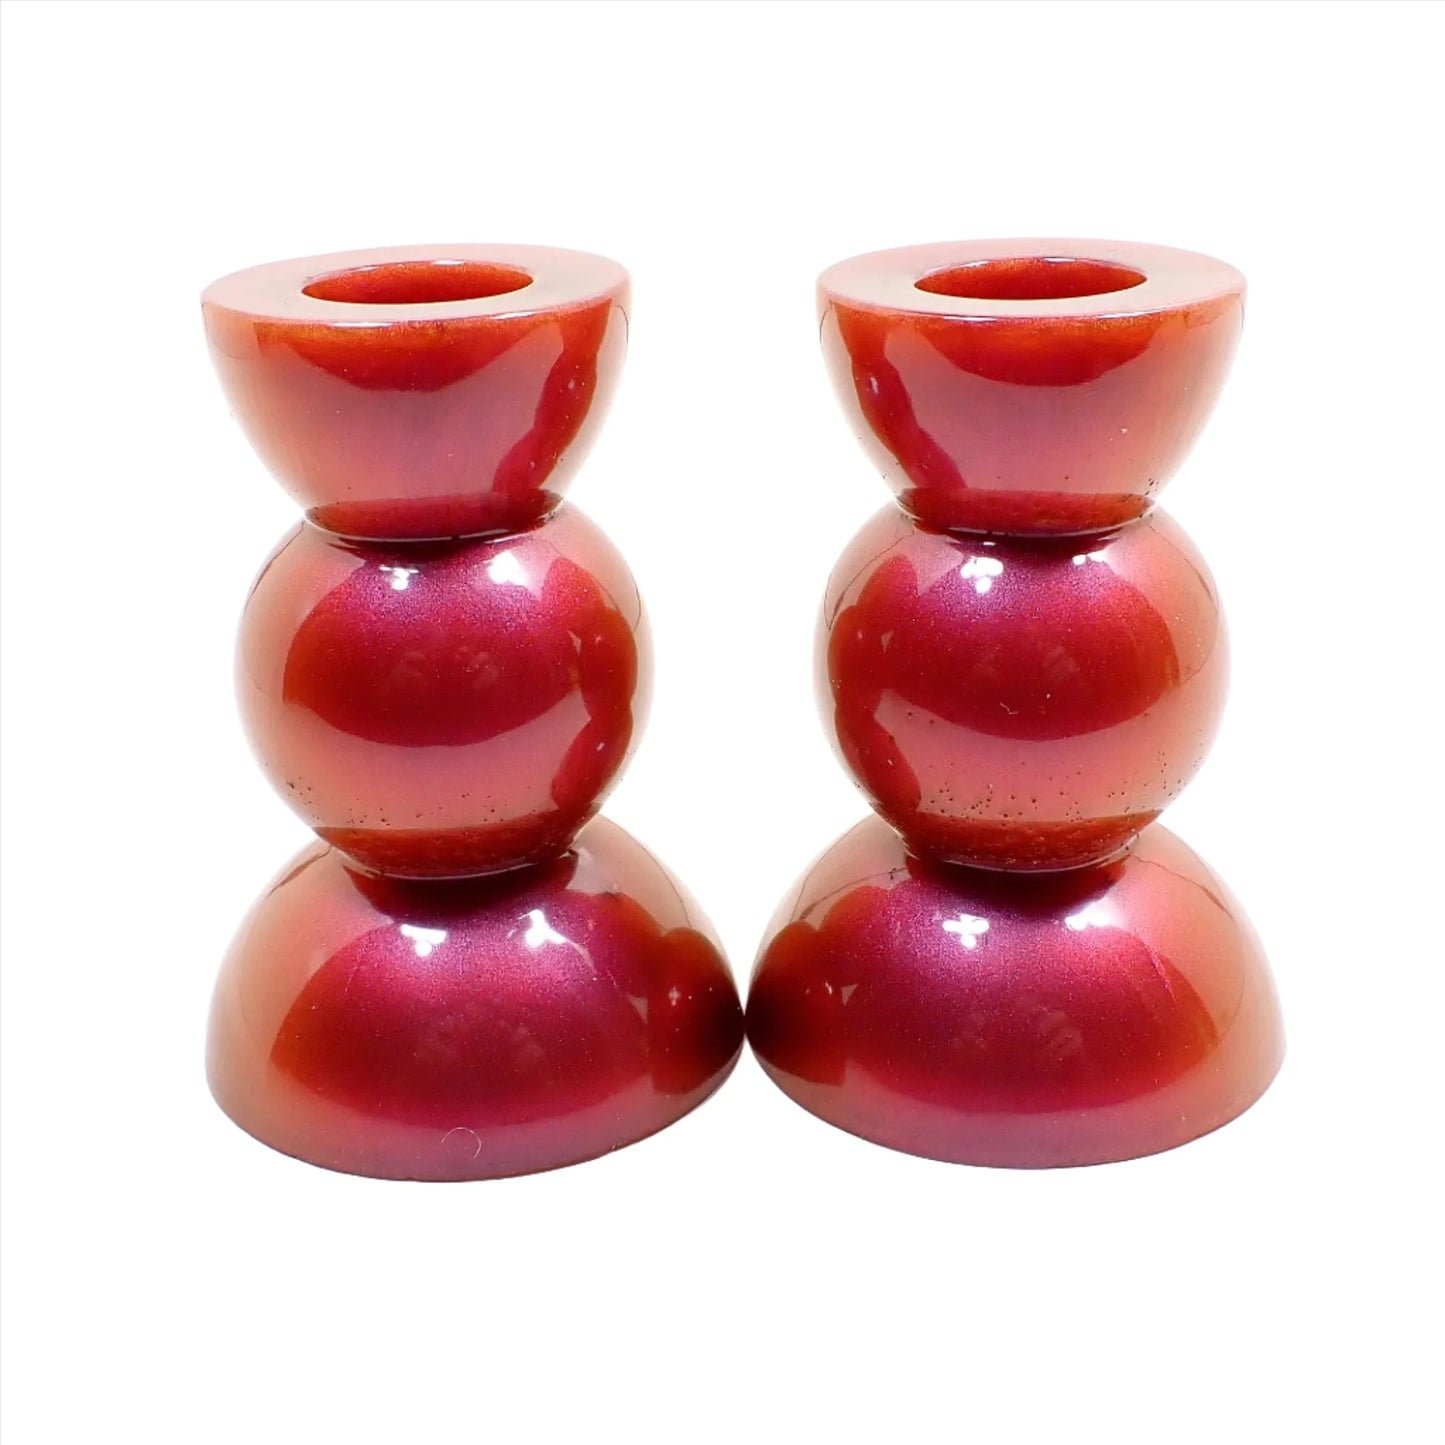 Side view of the handmade geometric candlestick holders. They have a round ball area in the middle and a semi sphere shape on the top and bottom. The resin is a pearly color shift resin with red, orange, pink, and purple hues like a sunset.